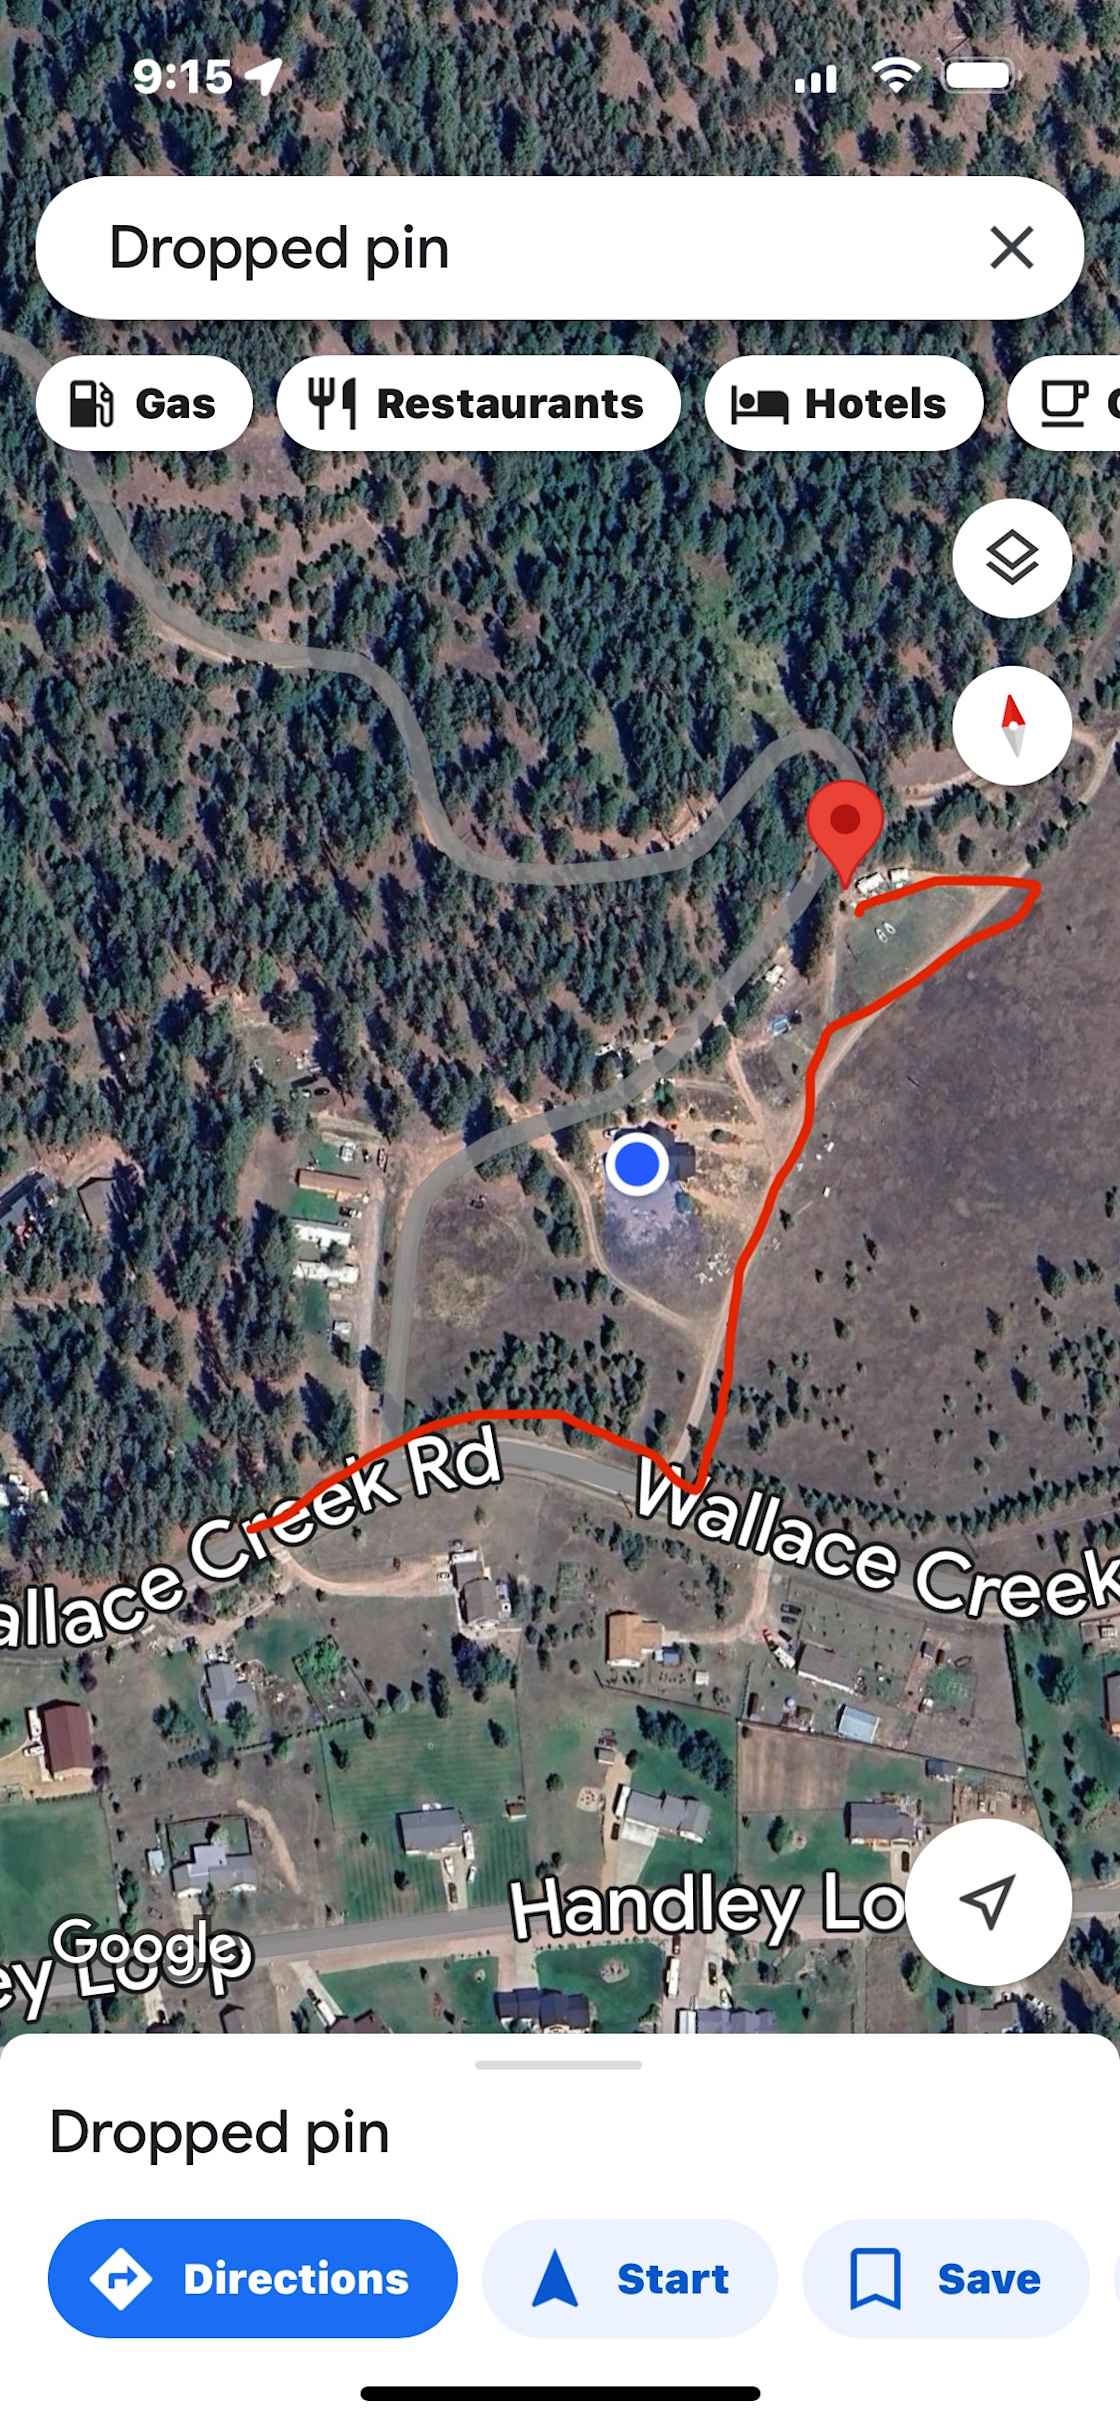 This picture shows back in directions for the site. Use this direction if you have a long RV or don’t have enough ground clearance.